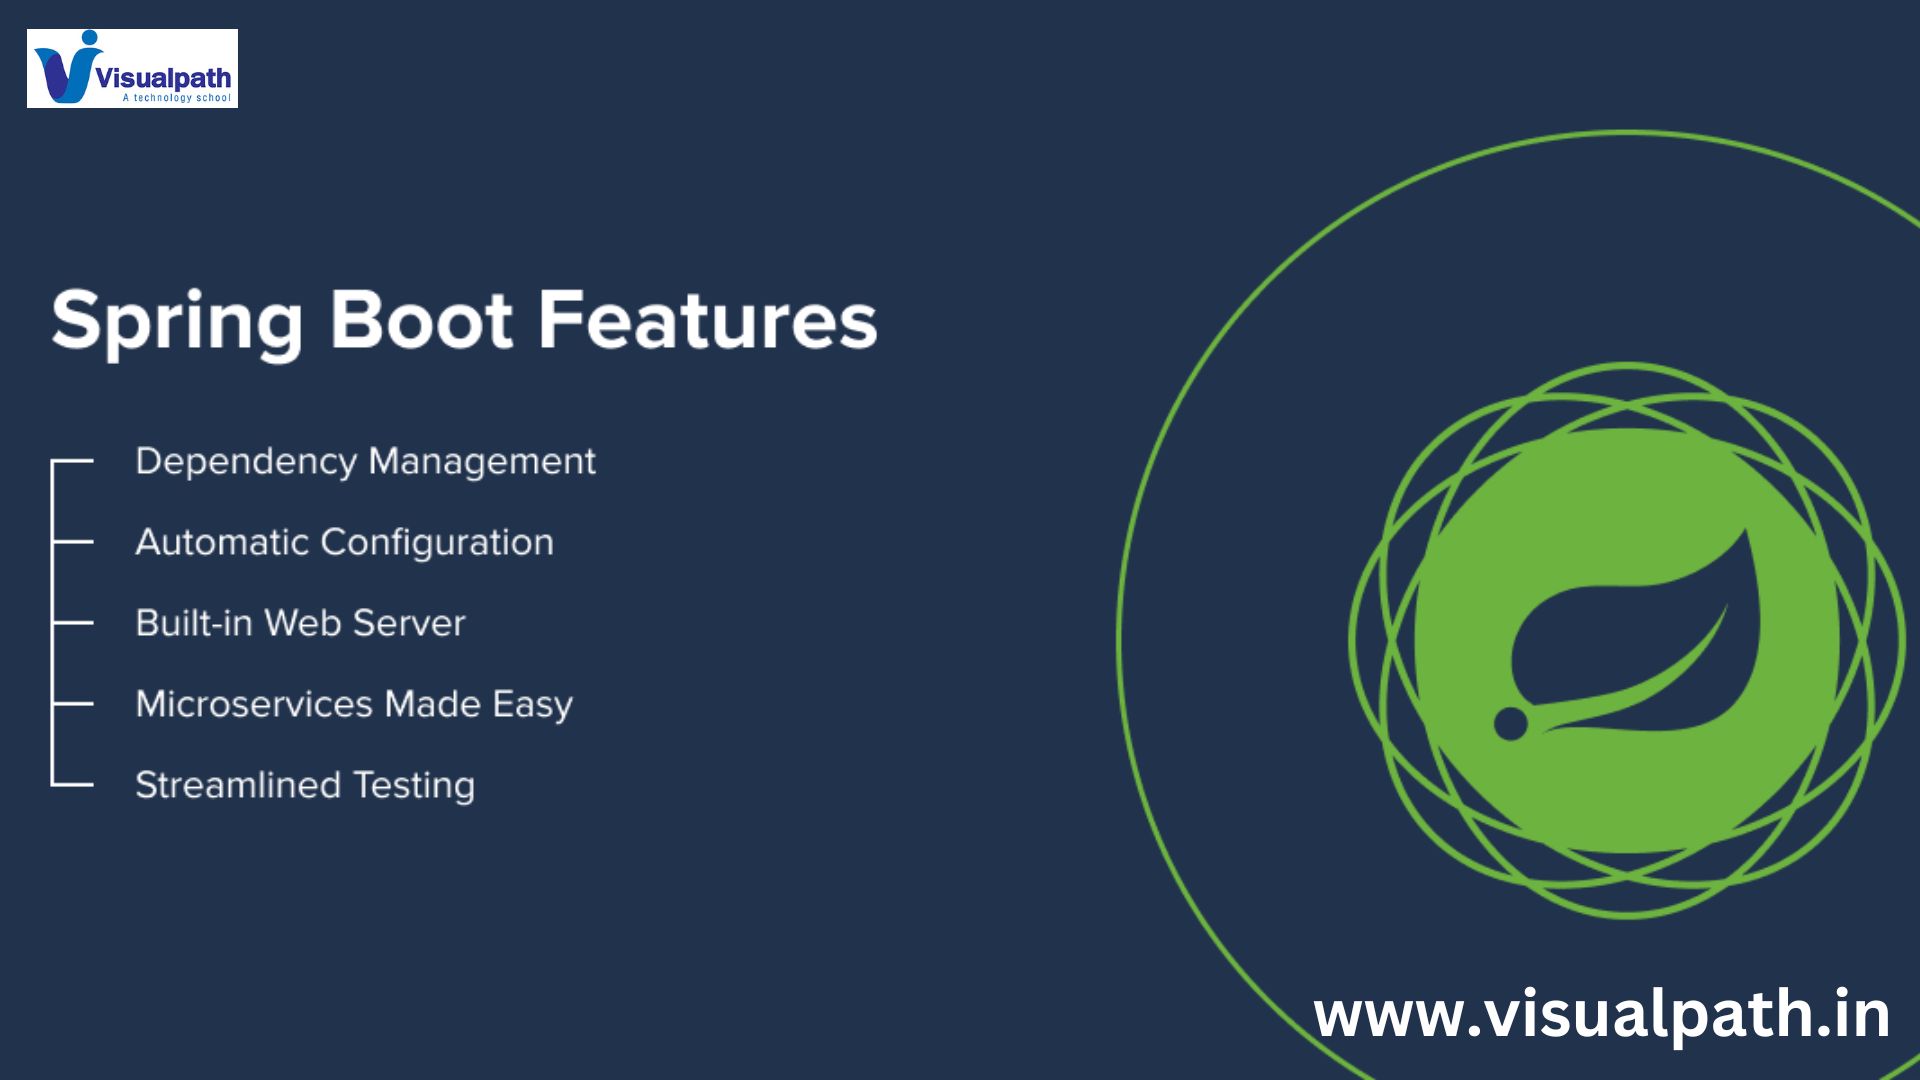 What are the Features of Spring Boot?